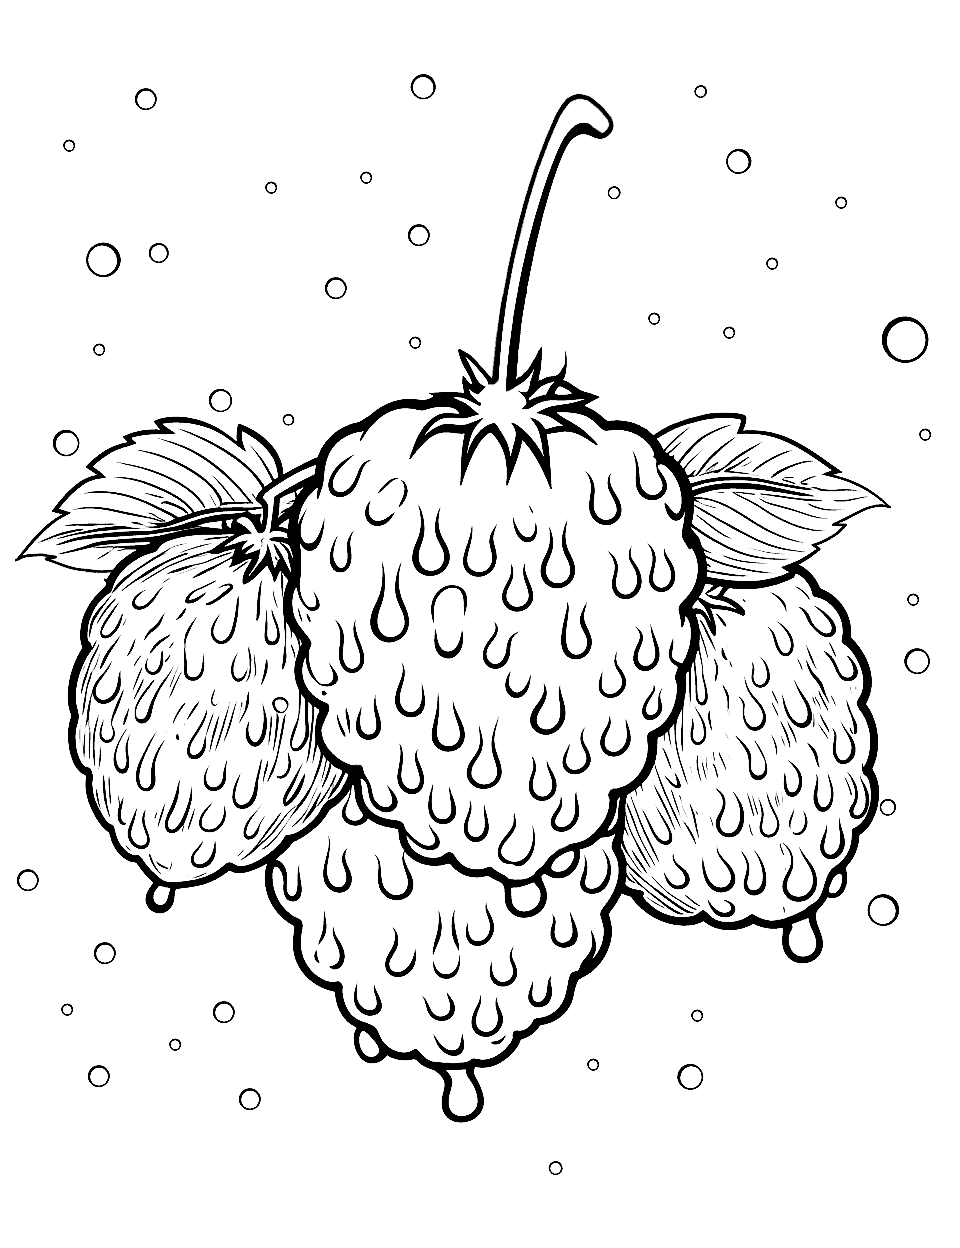 Raspberry Rain Fruit Coloring Page - Raspberries with raindrops falling gently on them.